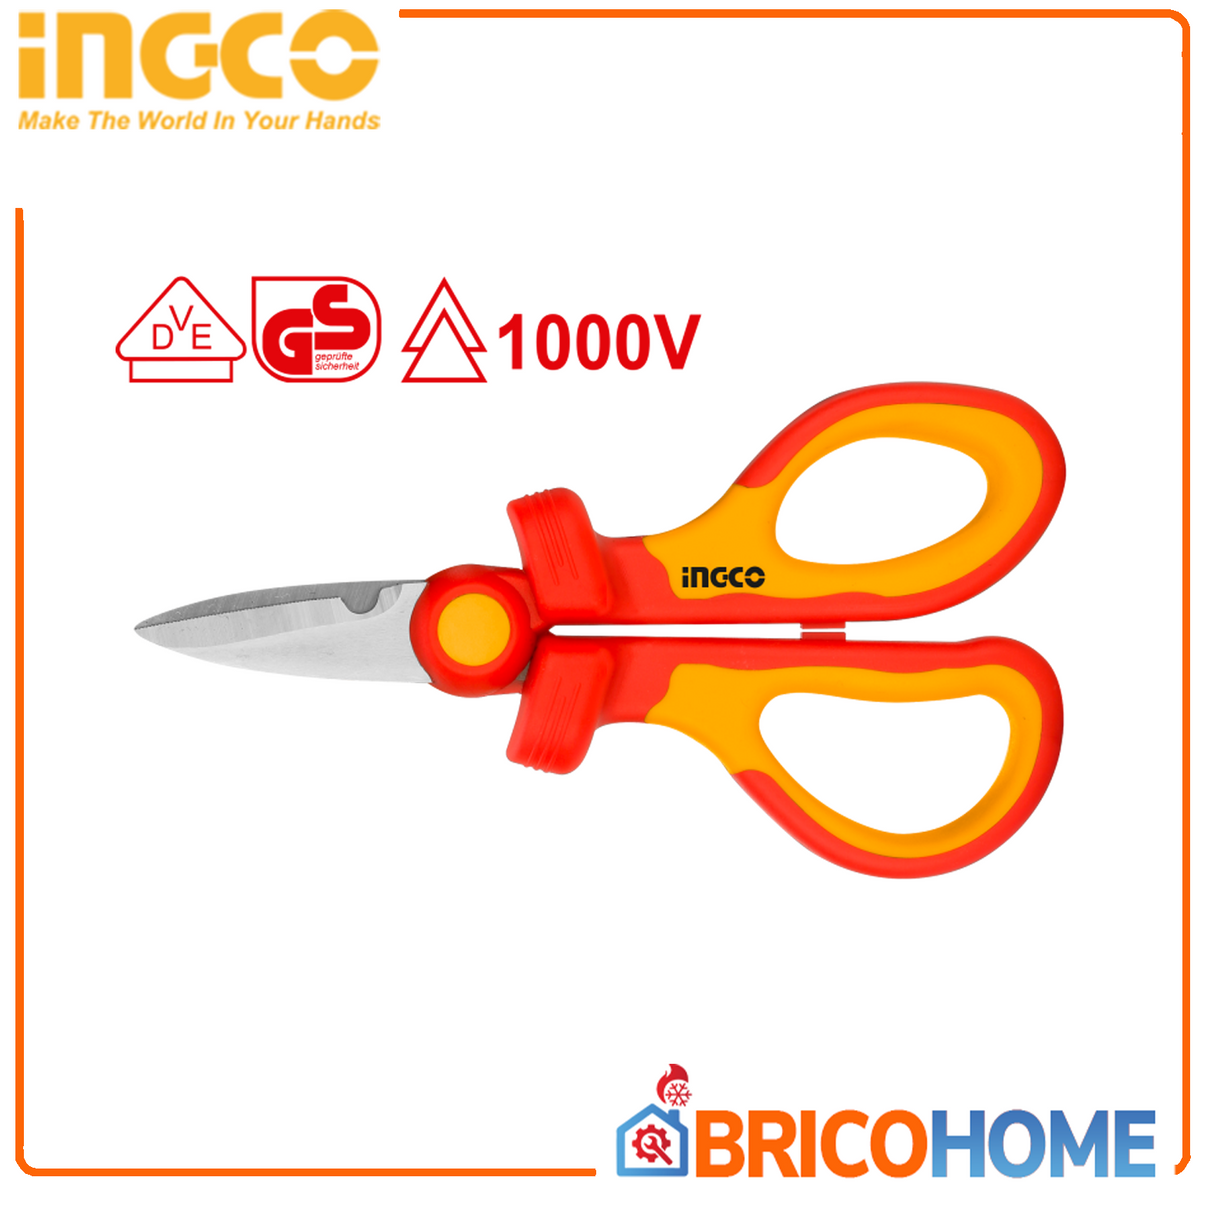 1000V insulated scissors for INGCO electricians